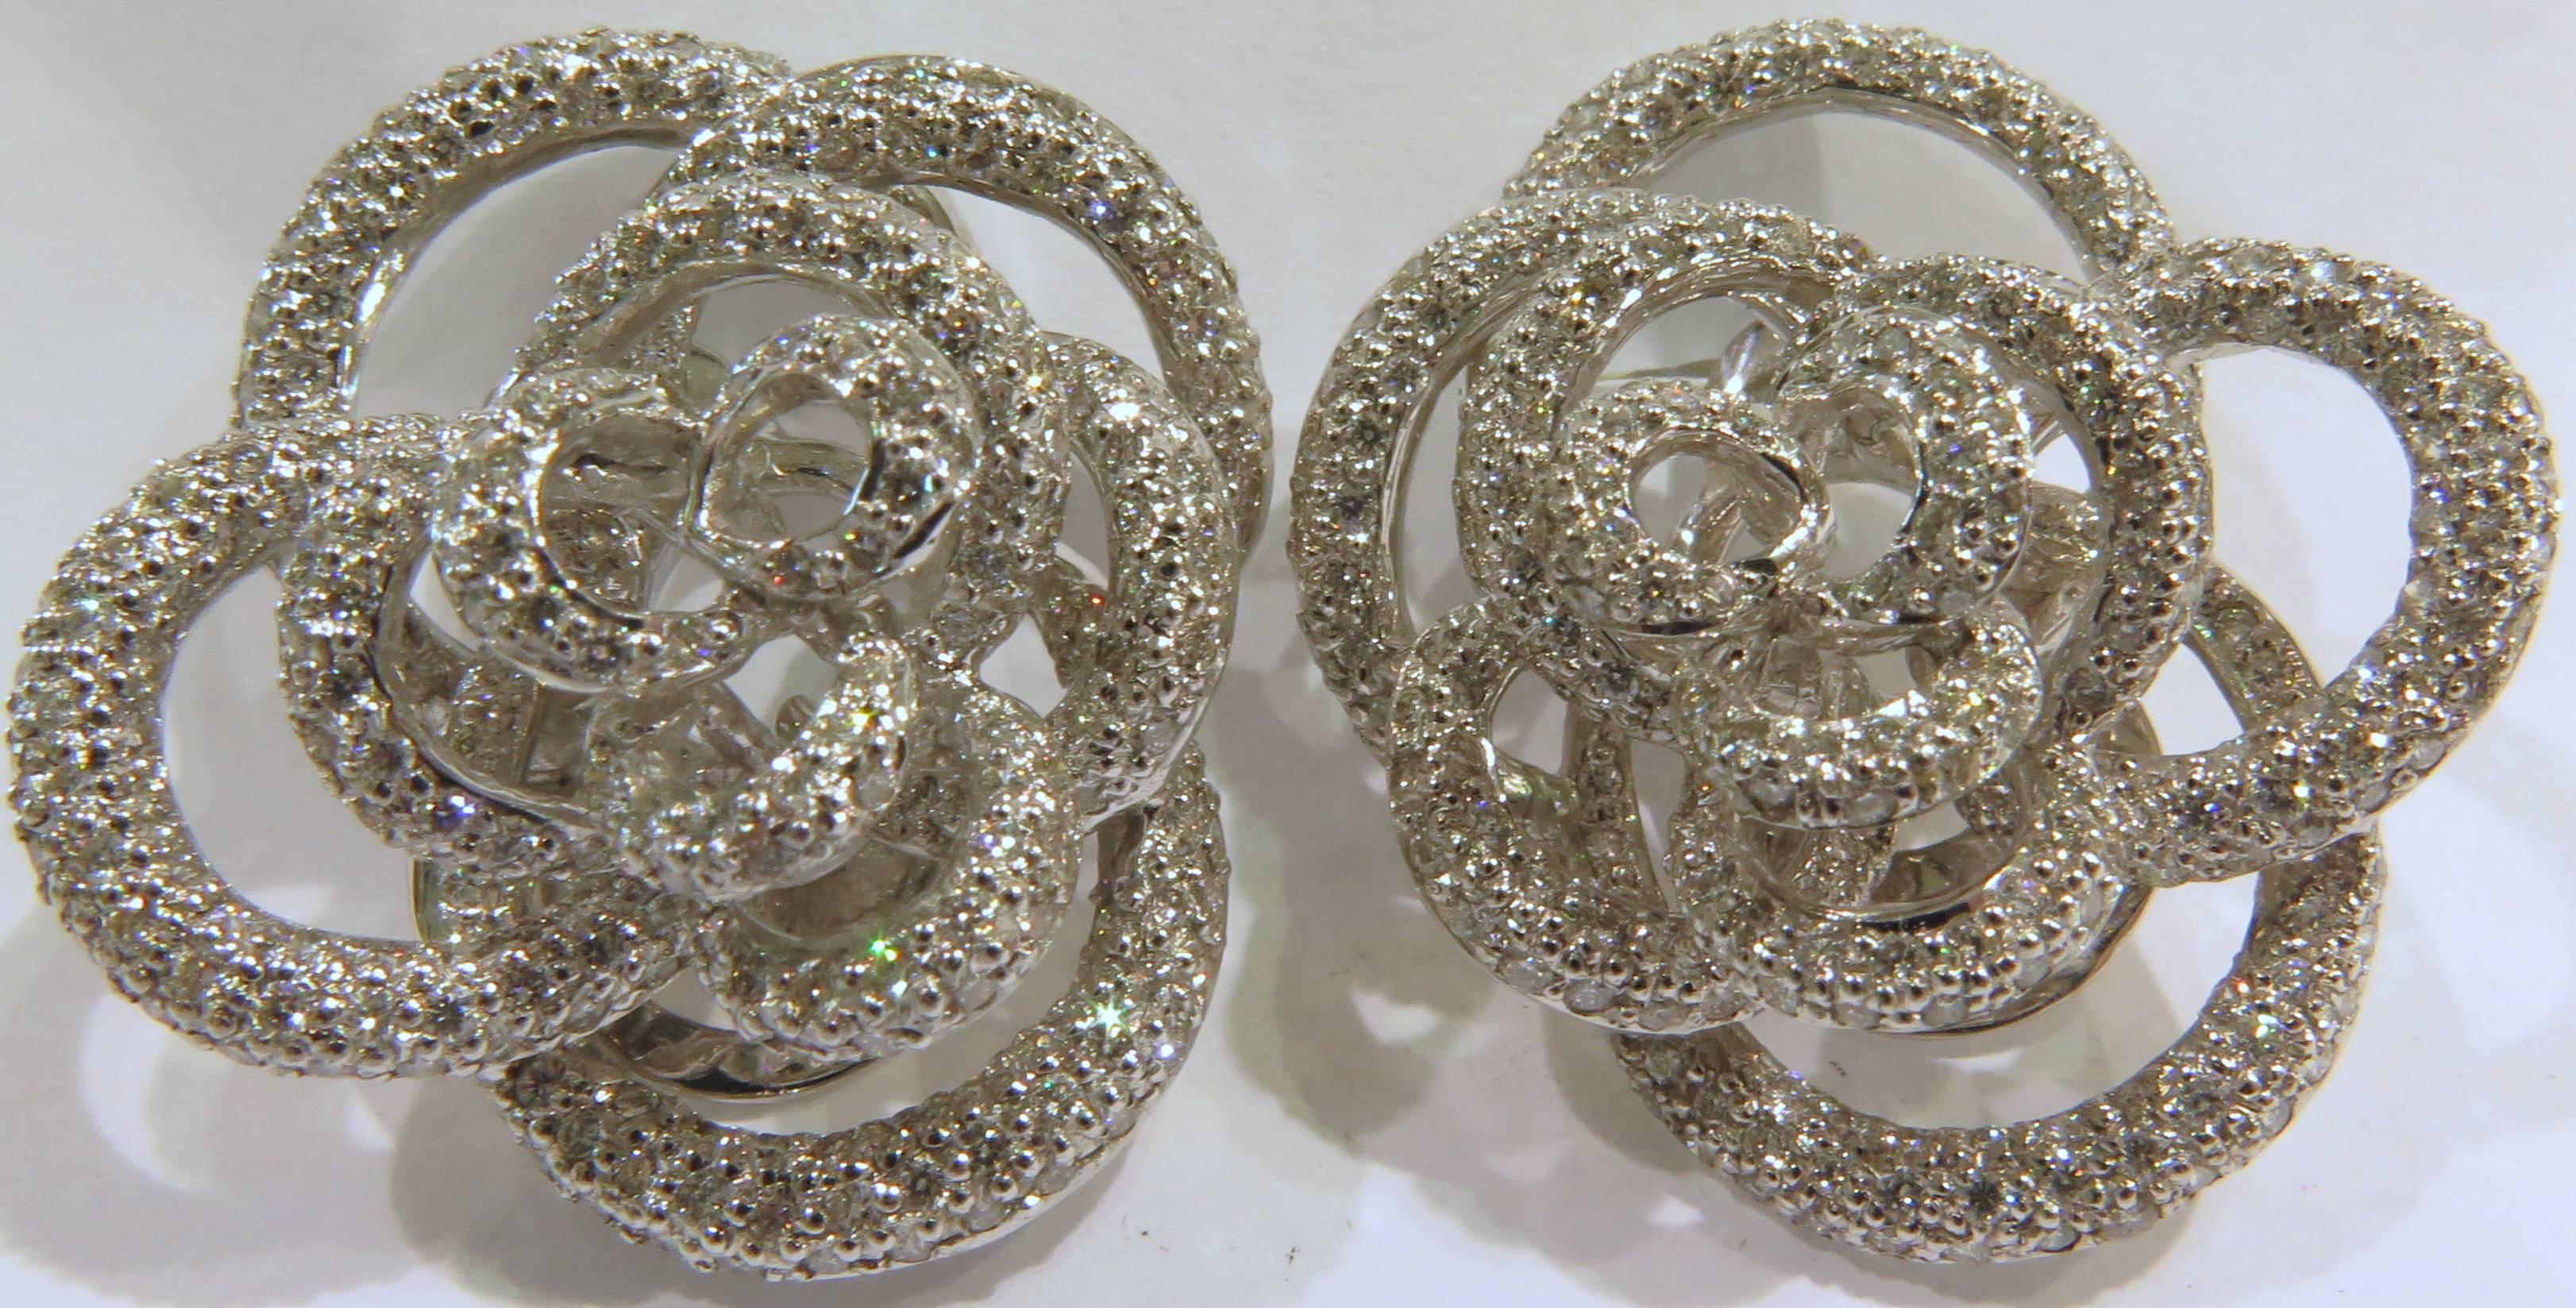 18k white gold rose motif earrings with 3.19ct diamonds. They have lever backs with posts. They are marked 750 for 18k.
These earrings weigh 22.1 grams.
These earrings at the widest are approx 1 1/8 inch 
